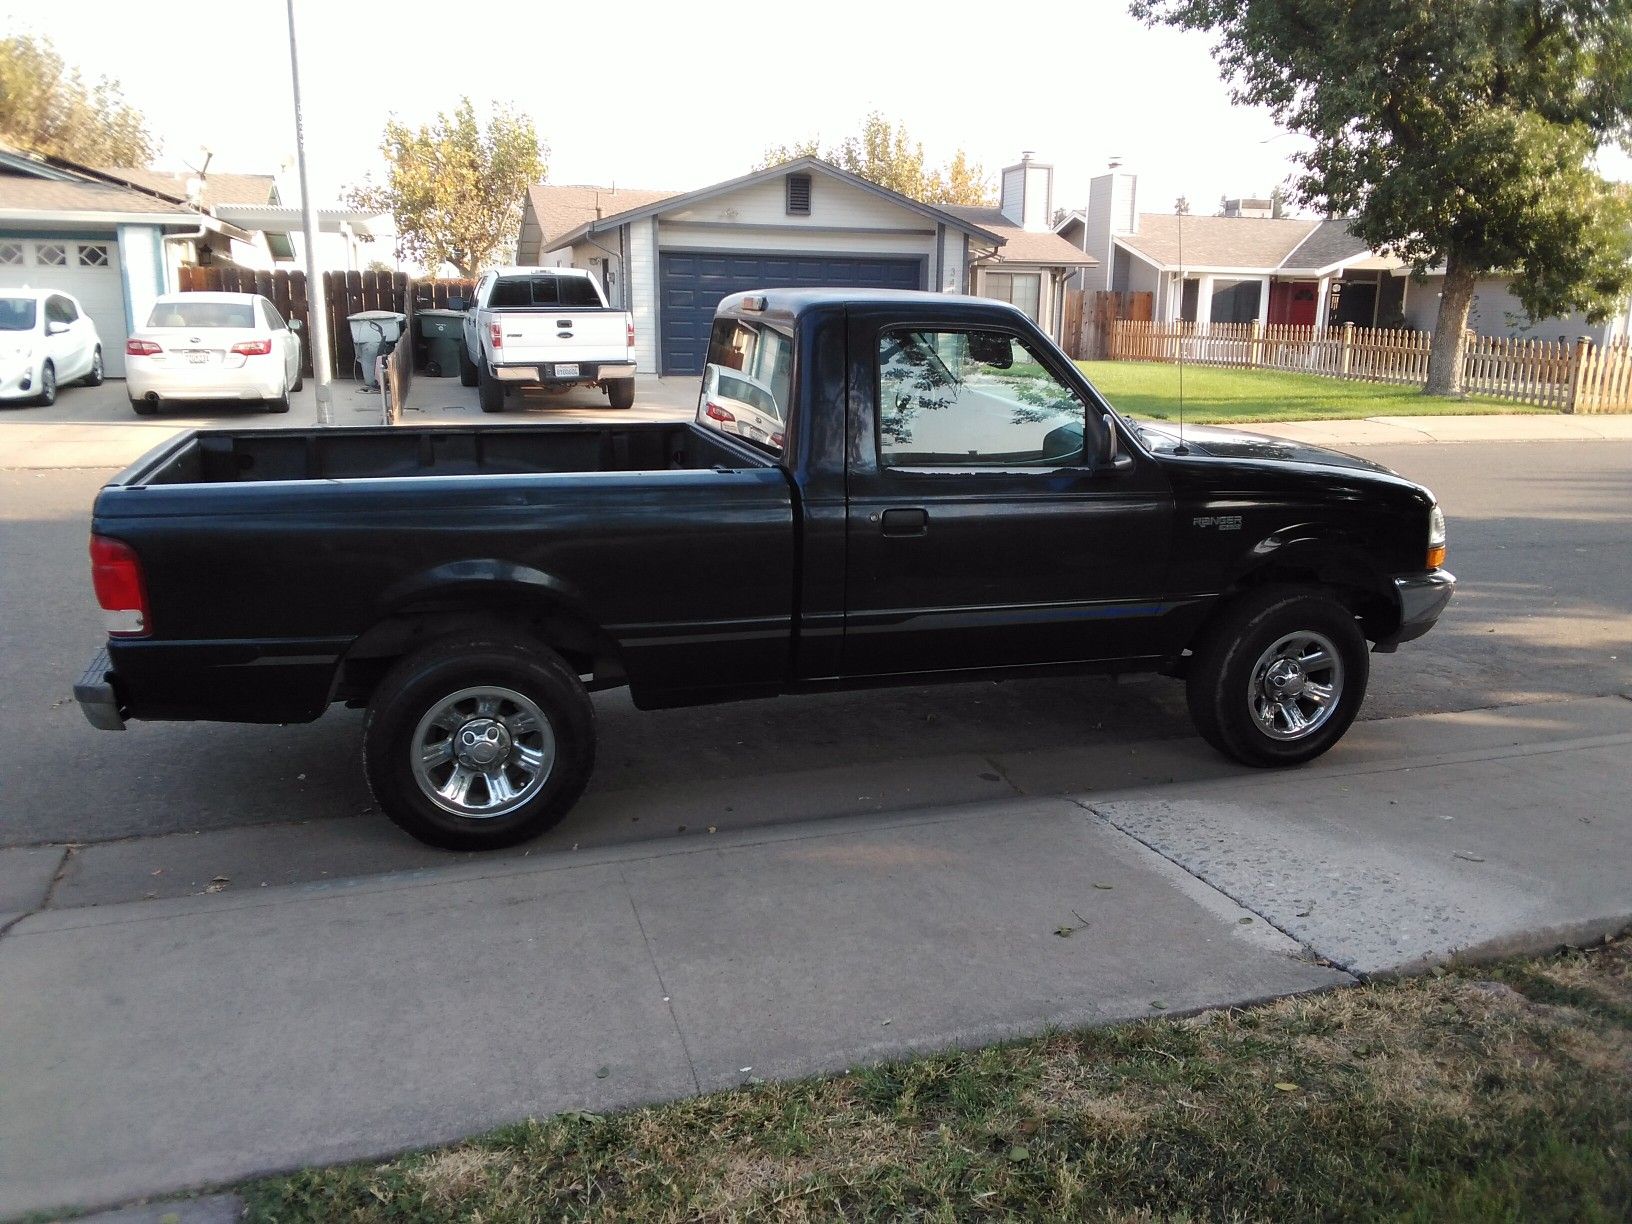 I Just bought this truck unseen 2000 Ford Ranger XLT Work Truck